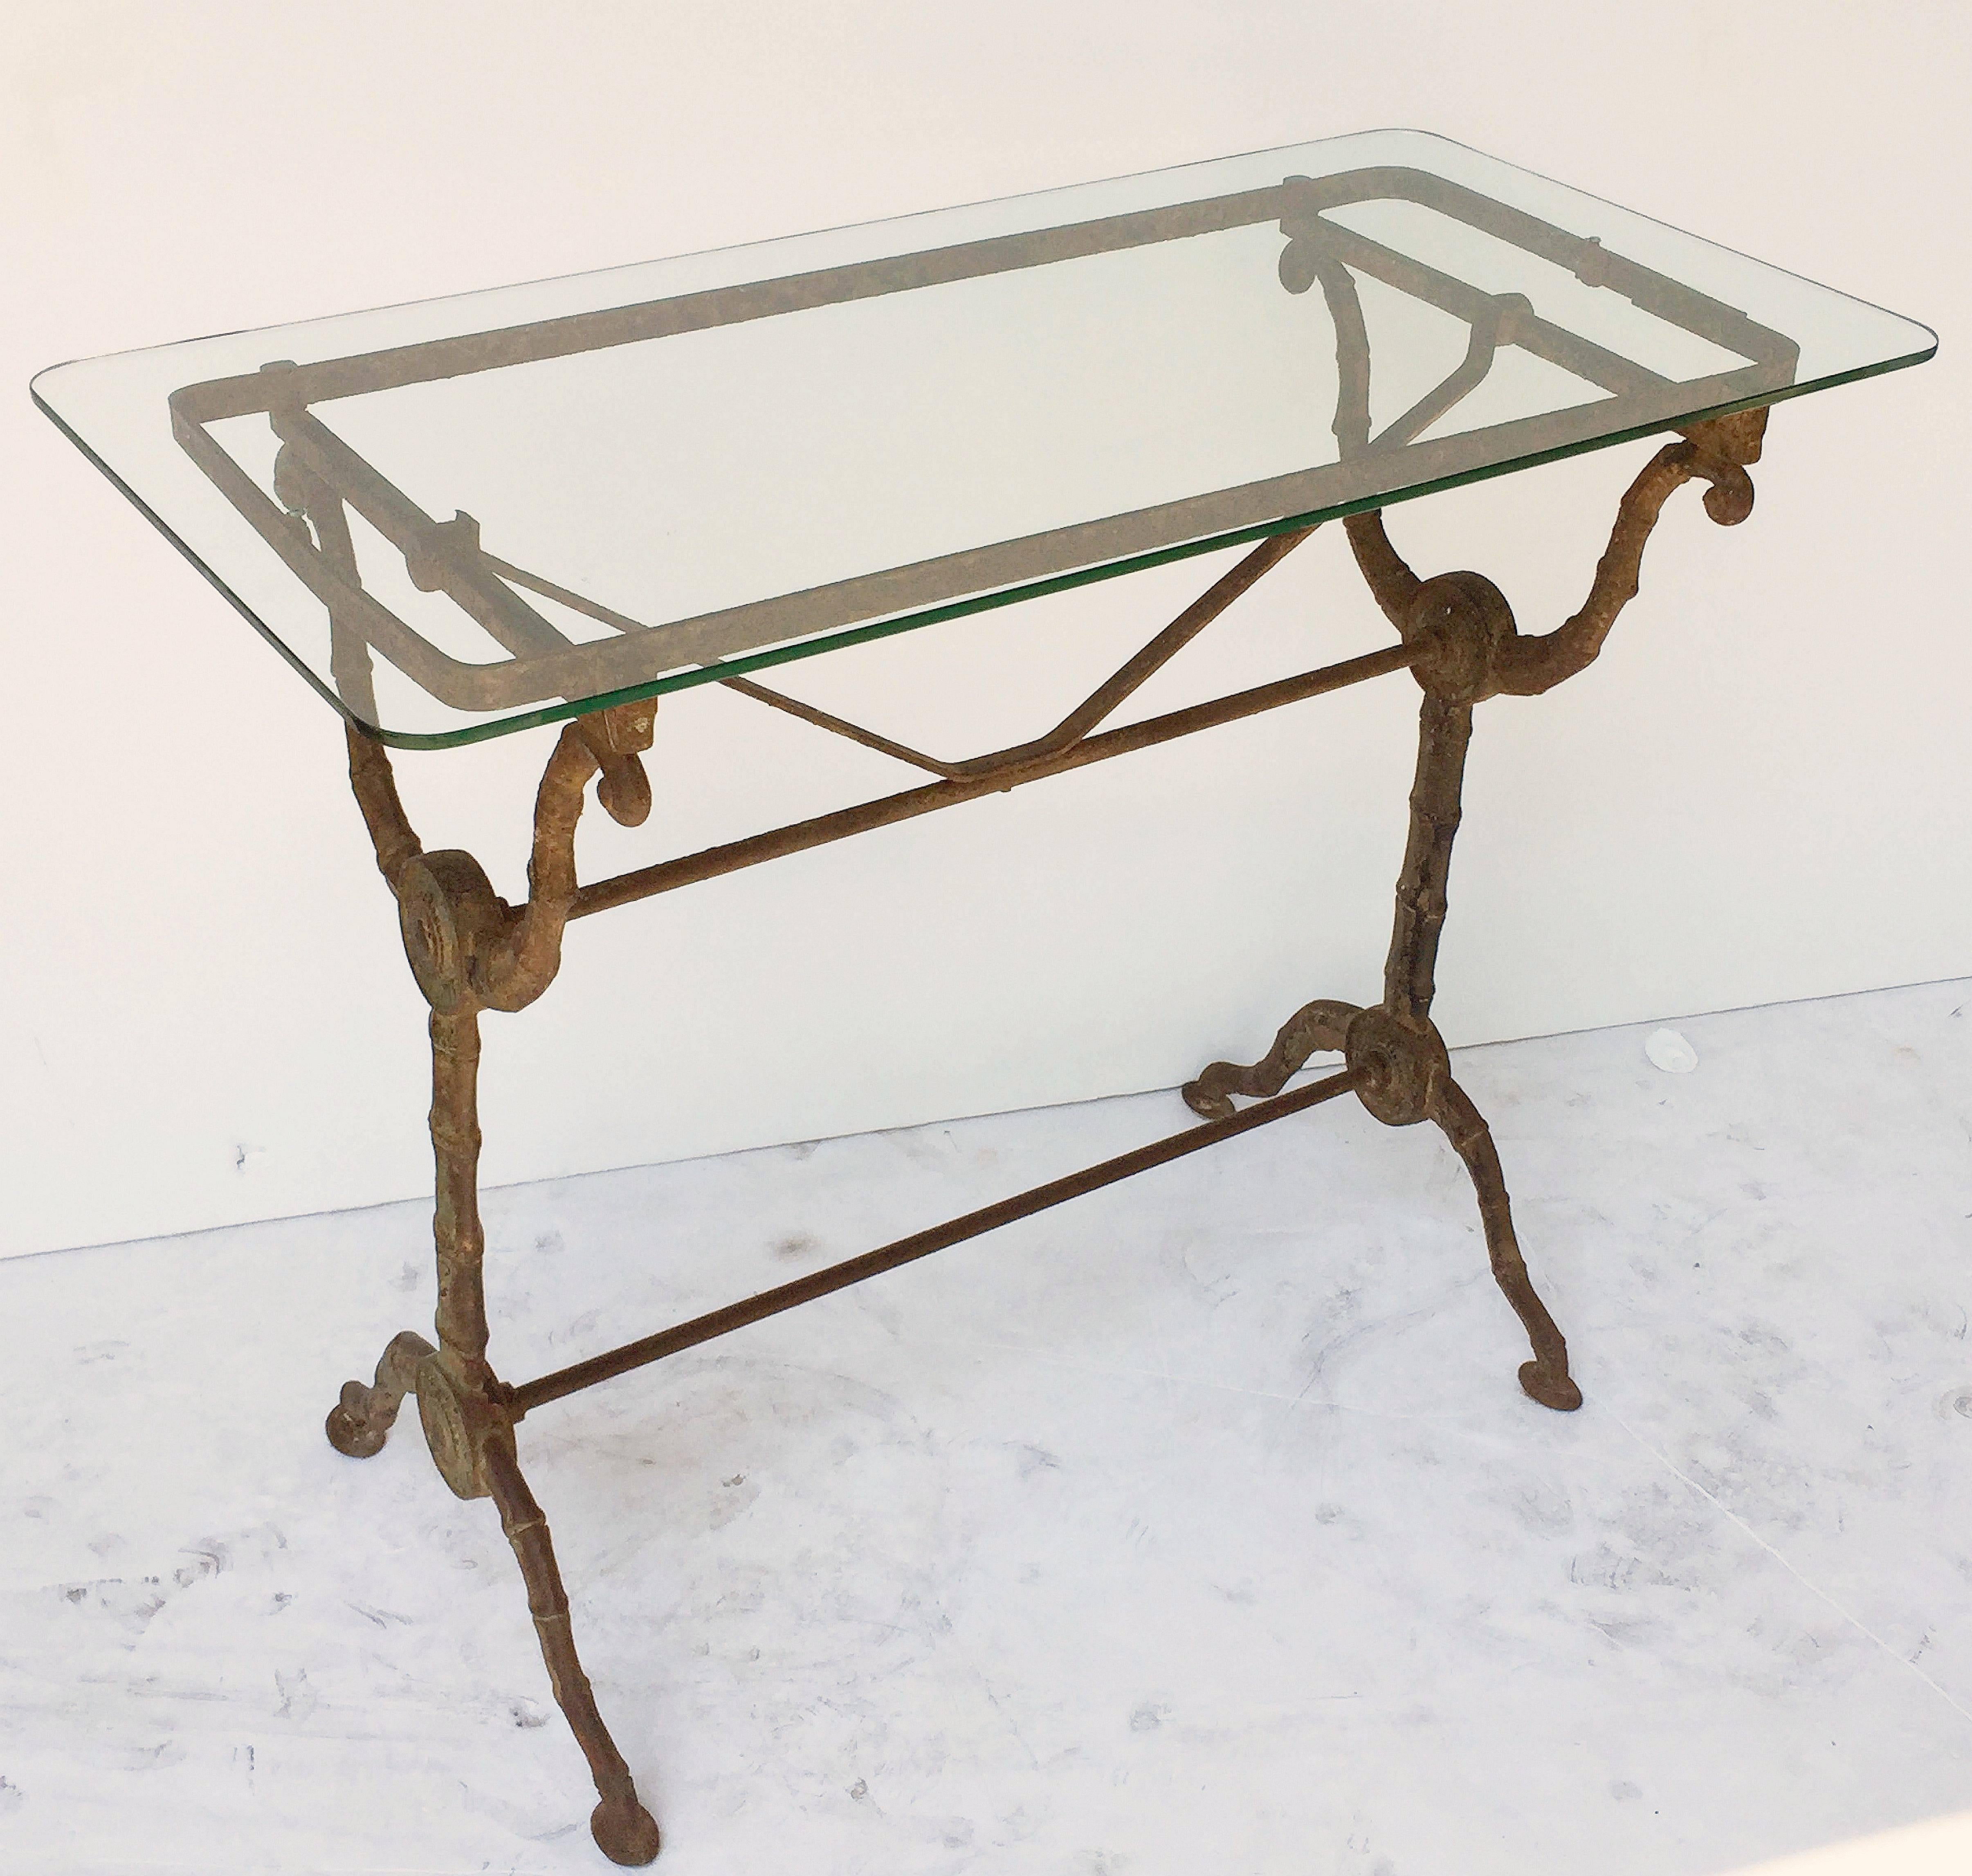 A pair of handsome English pub or bistro tables, each with a rectangular clear glass top, set upon a cast iron base with fine scroll work and sturdy segmented or faux bamboo supports.

There are two available for sale.
Individually priced - $2995